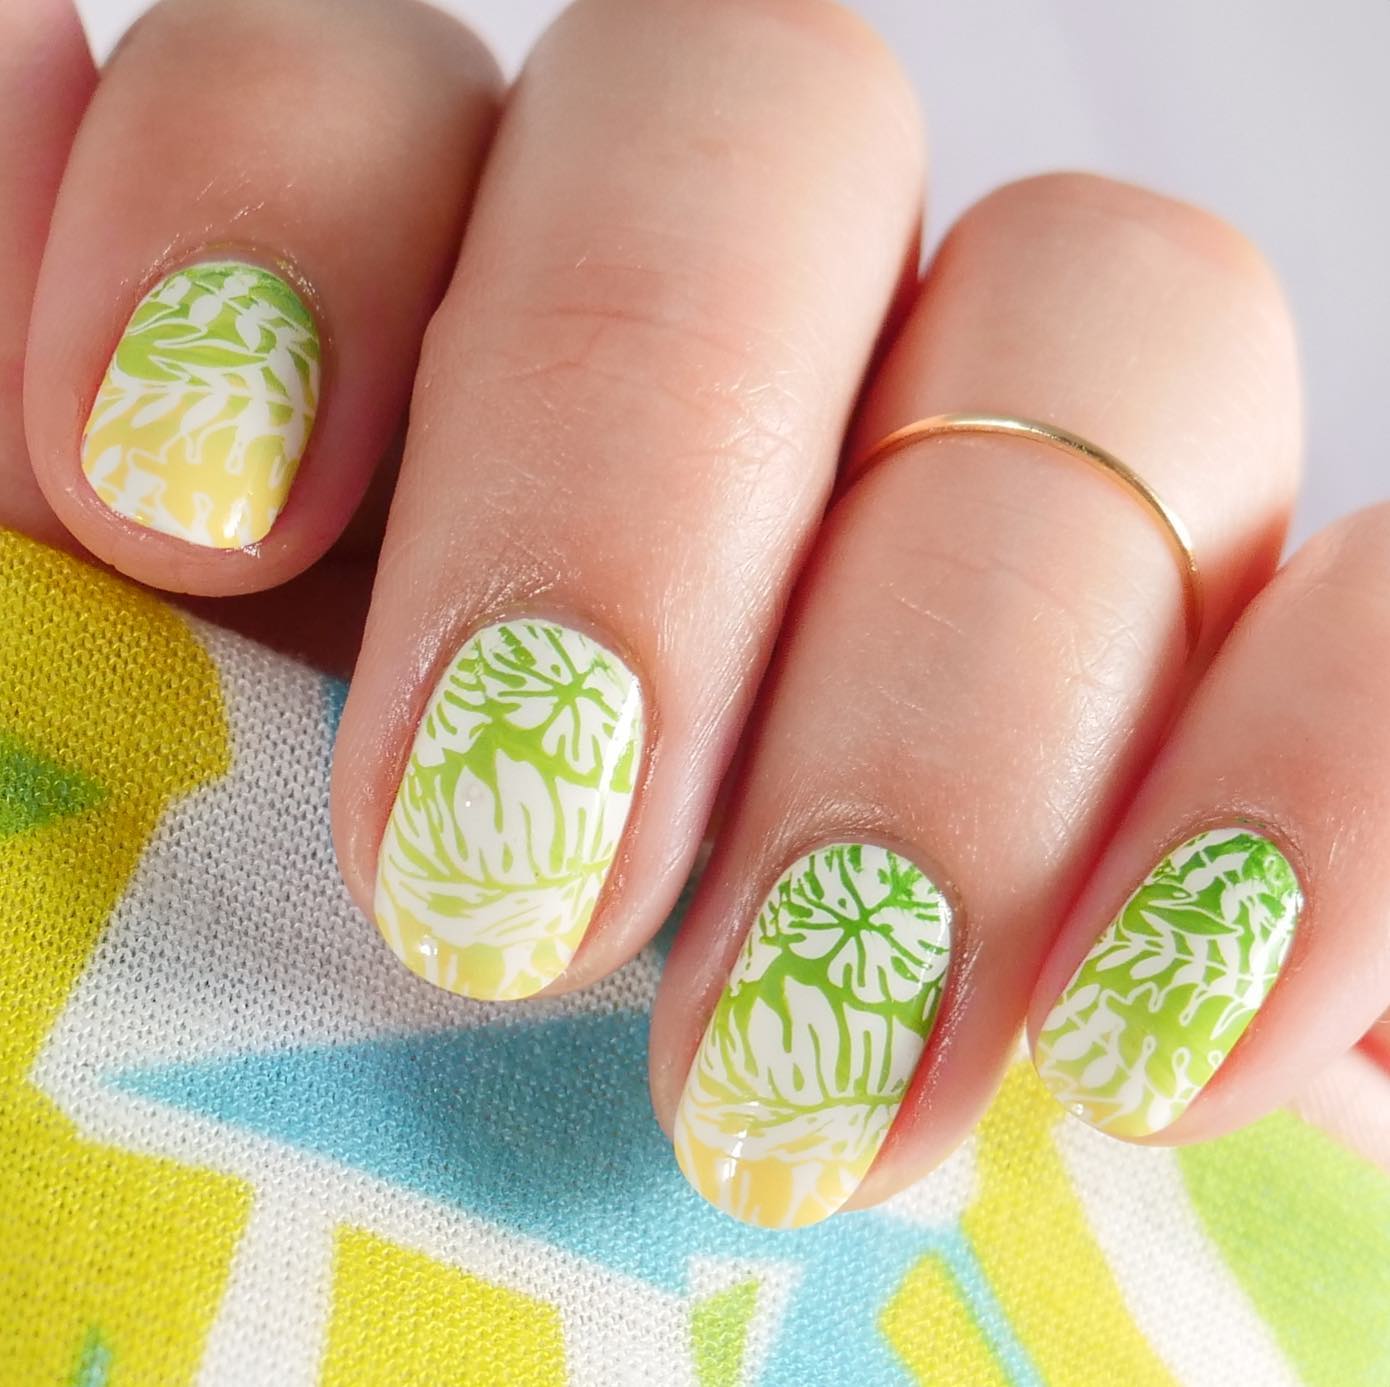 Nail art with ombre touch and tropical design